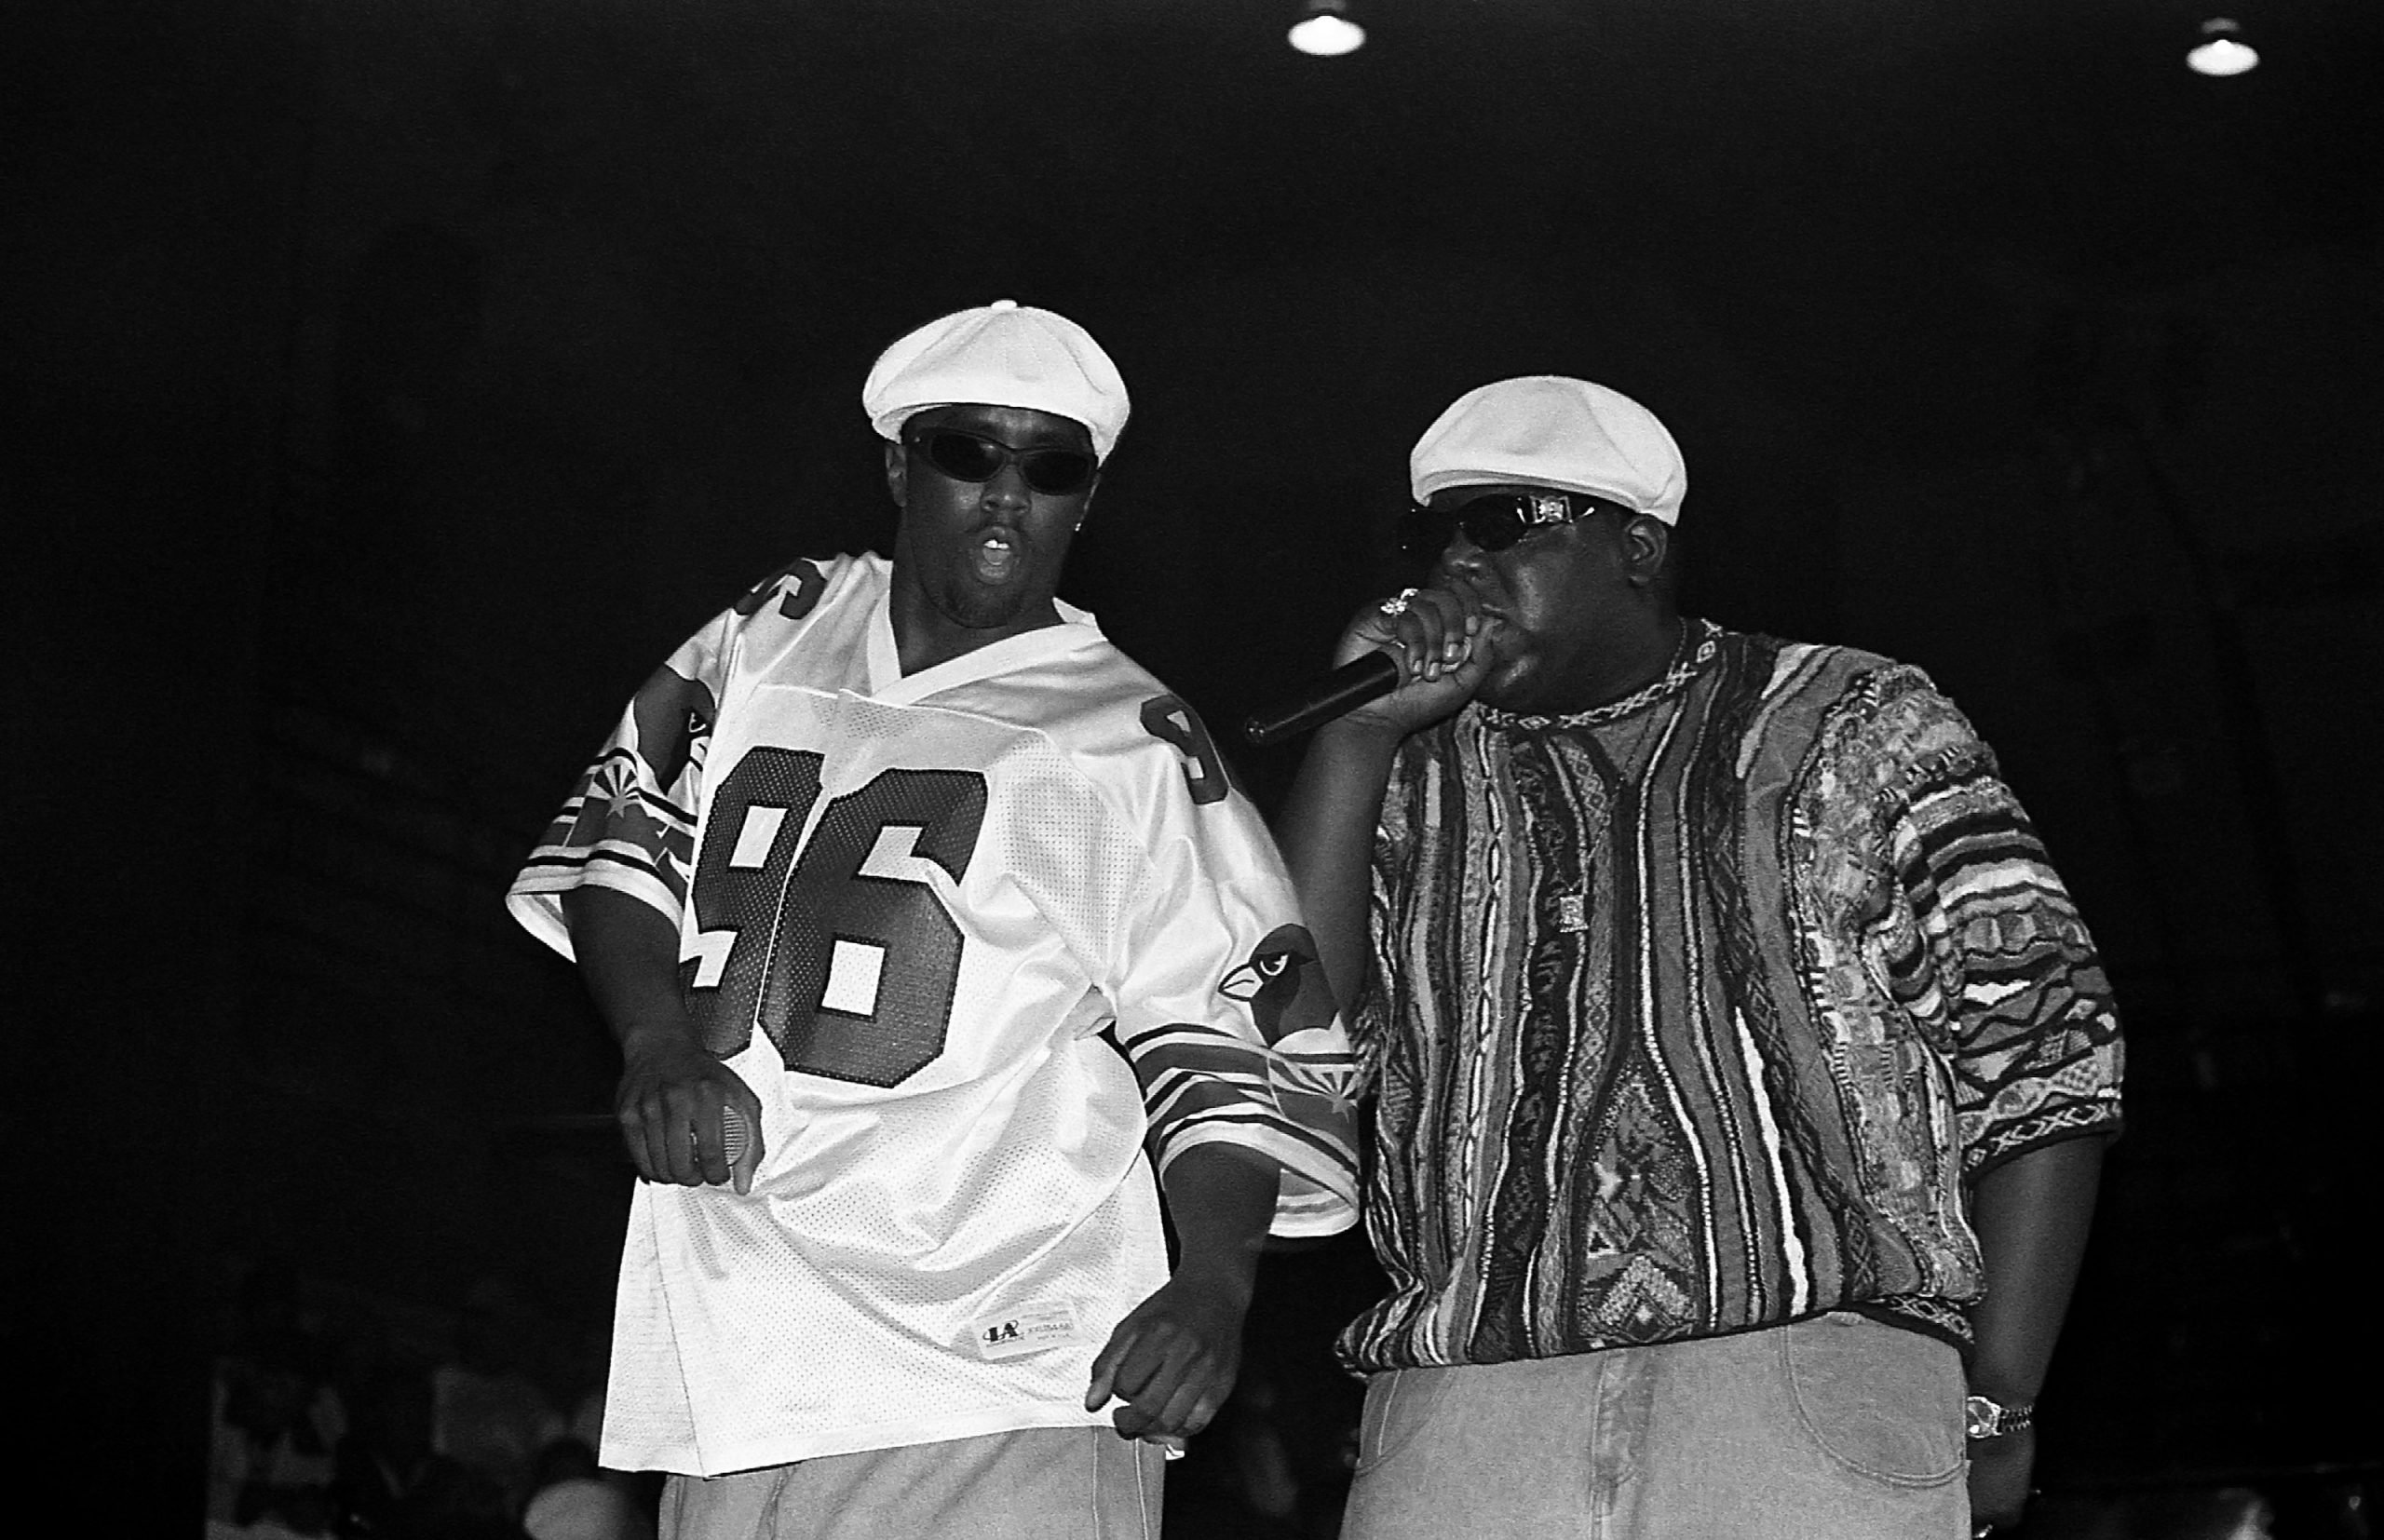 Sean 'Puffy' Combs and The Notorious B.I.G performing together wearing matching white hats